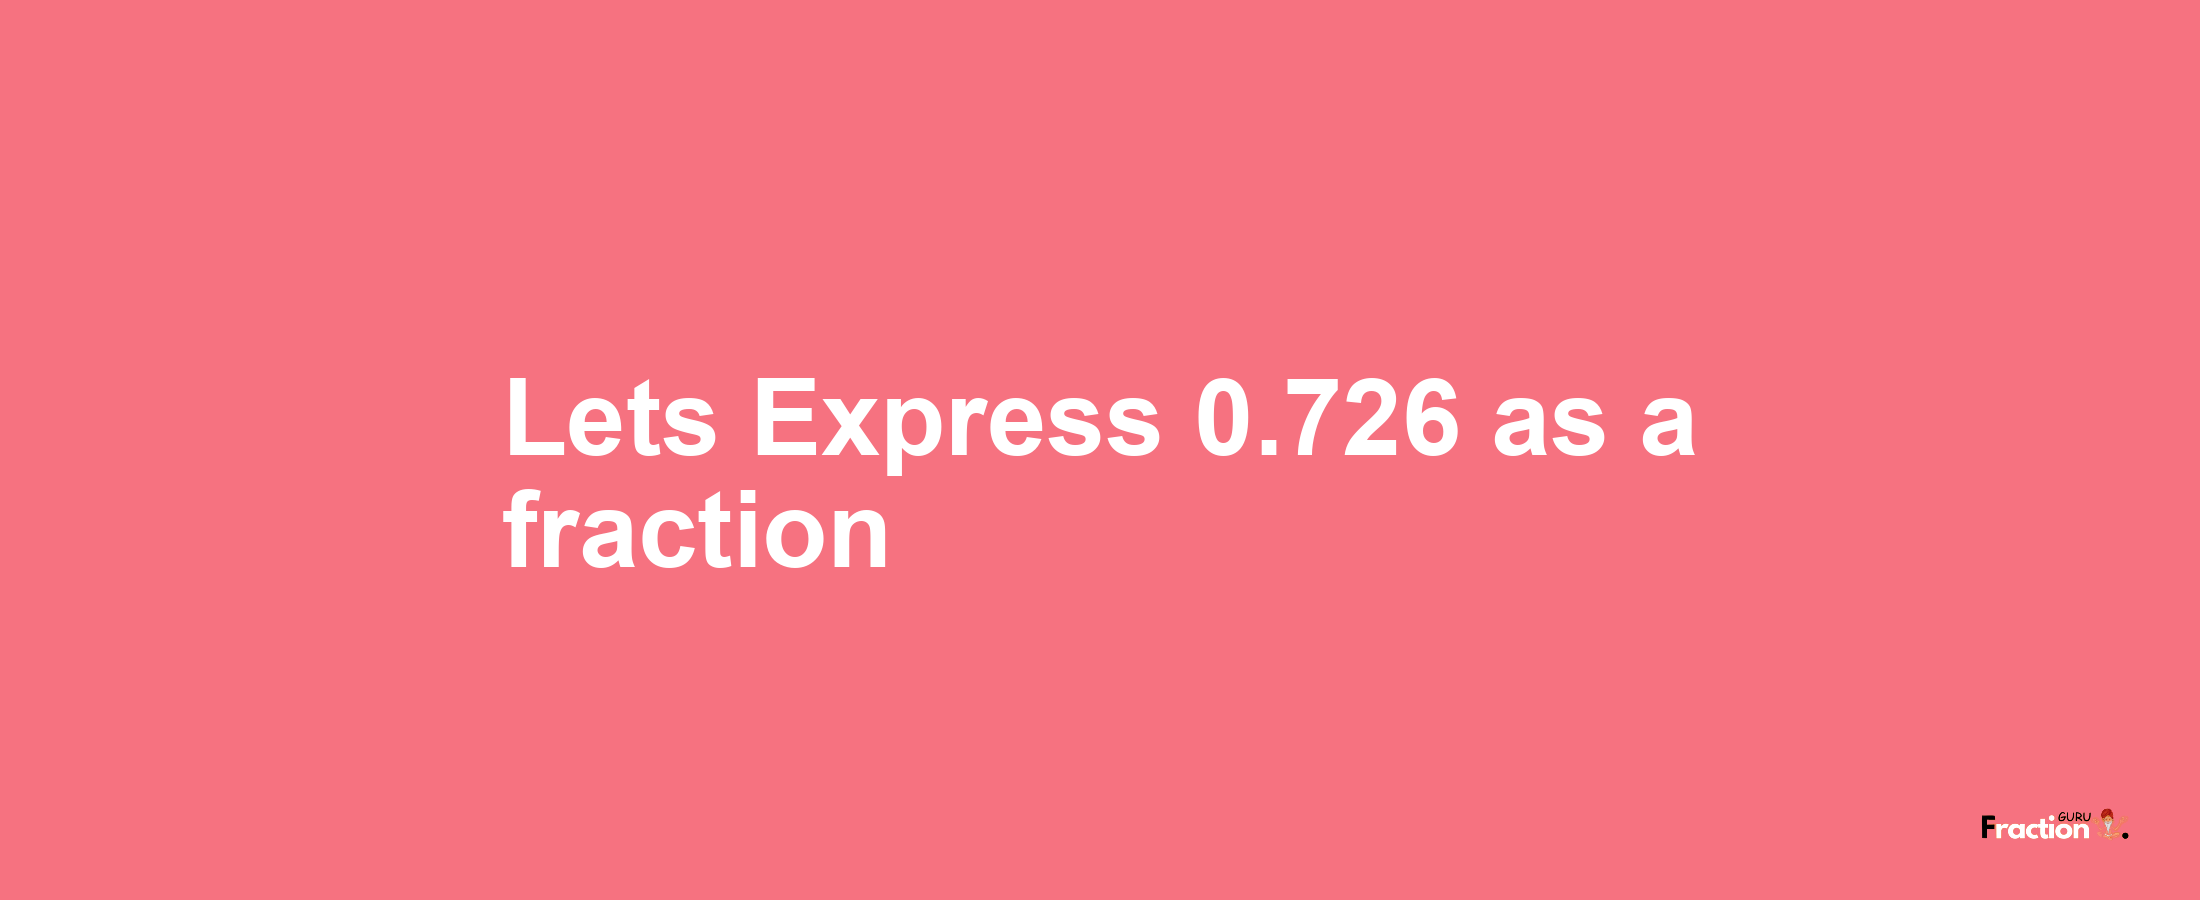 Lets Express 0.726 as afraction